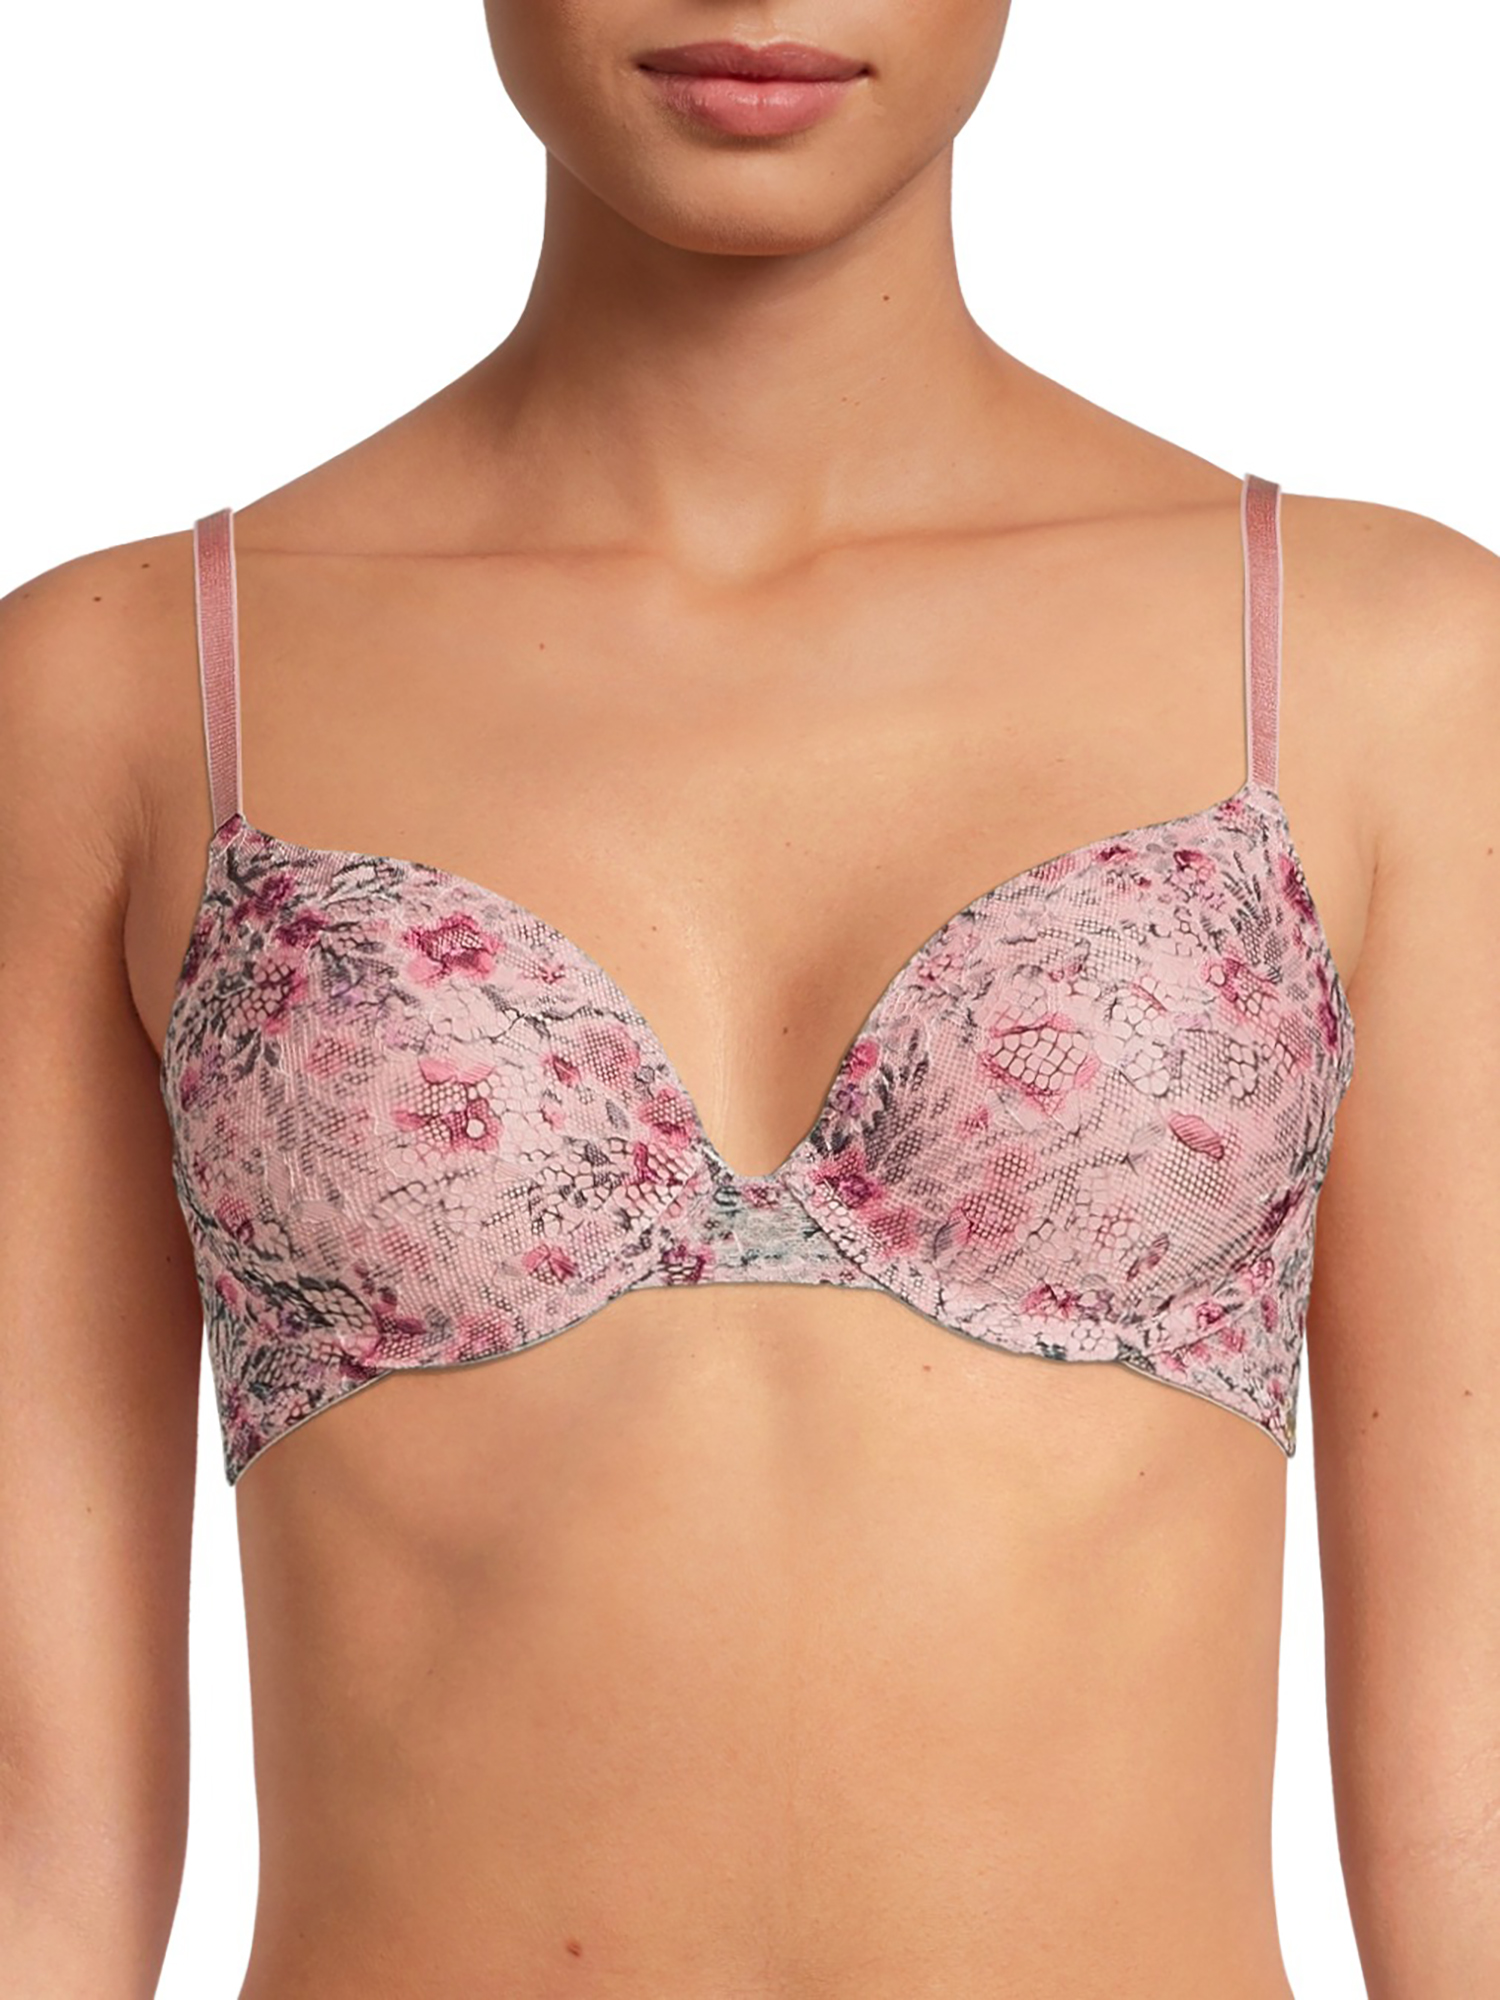 Jessica SimpsonWomen's Allover Lace Push-up Bra 3 Pack - image 2 of 3